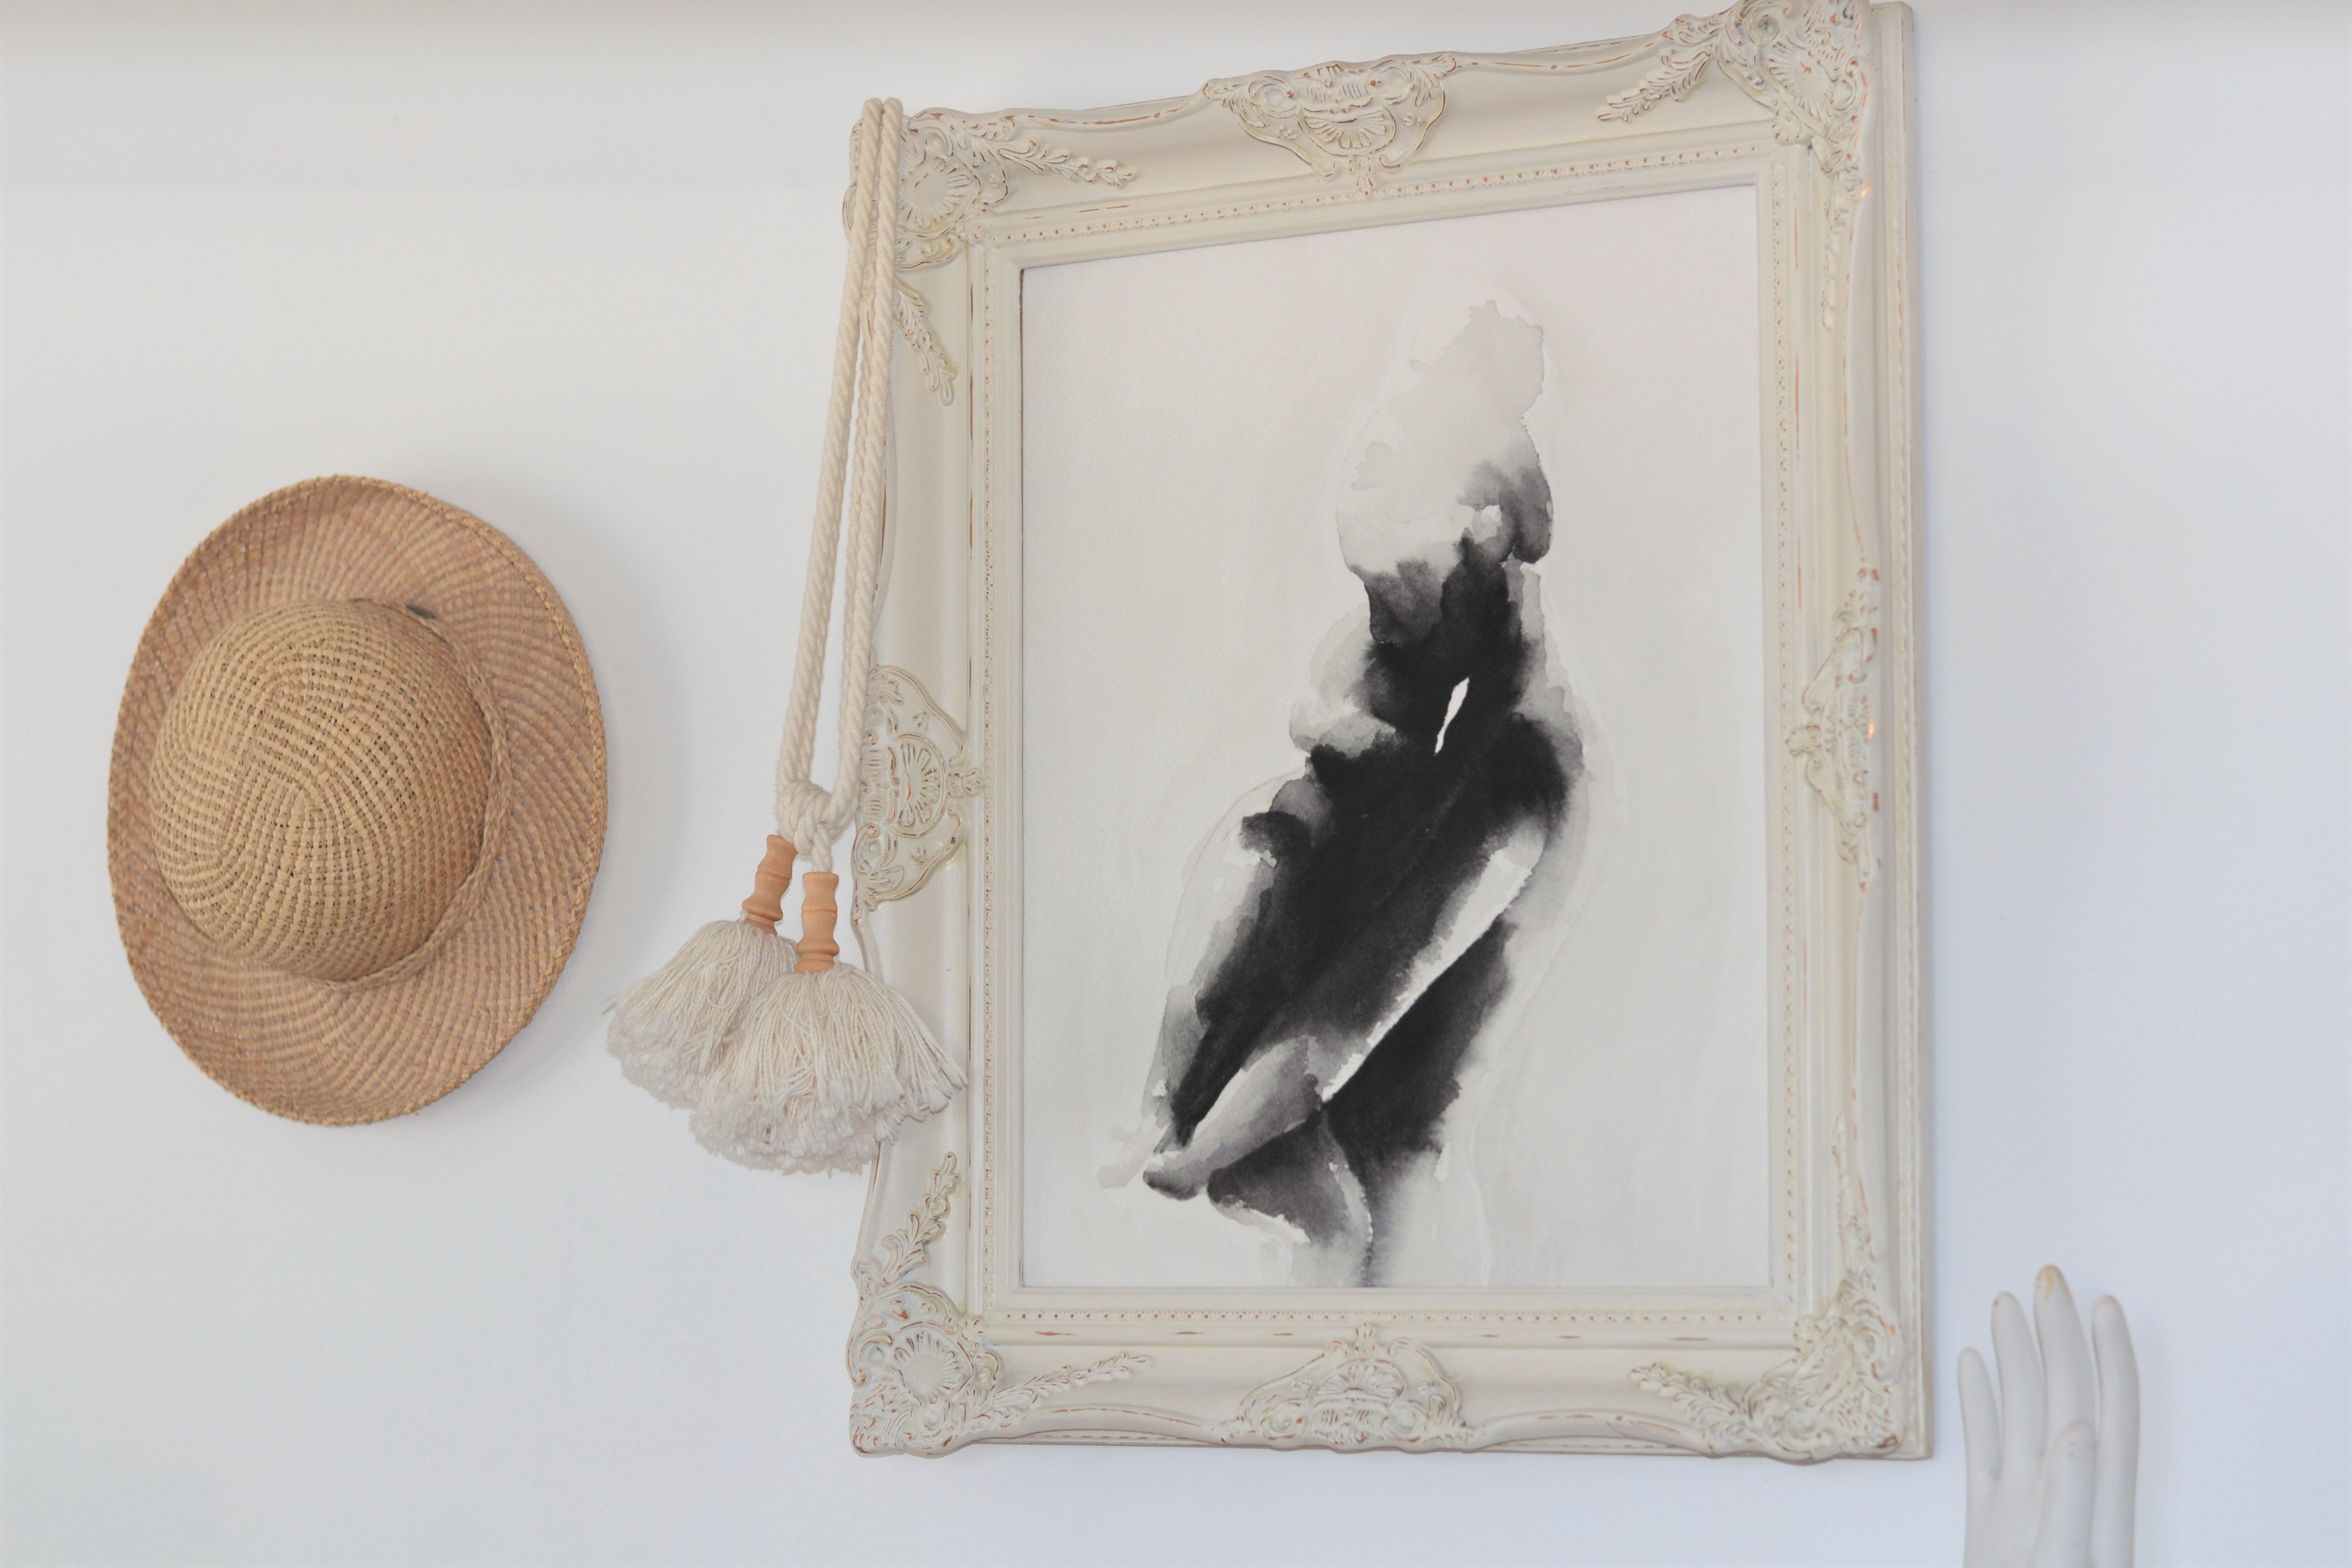 Thrifted frame and everyday hats as decor